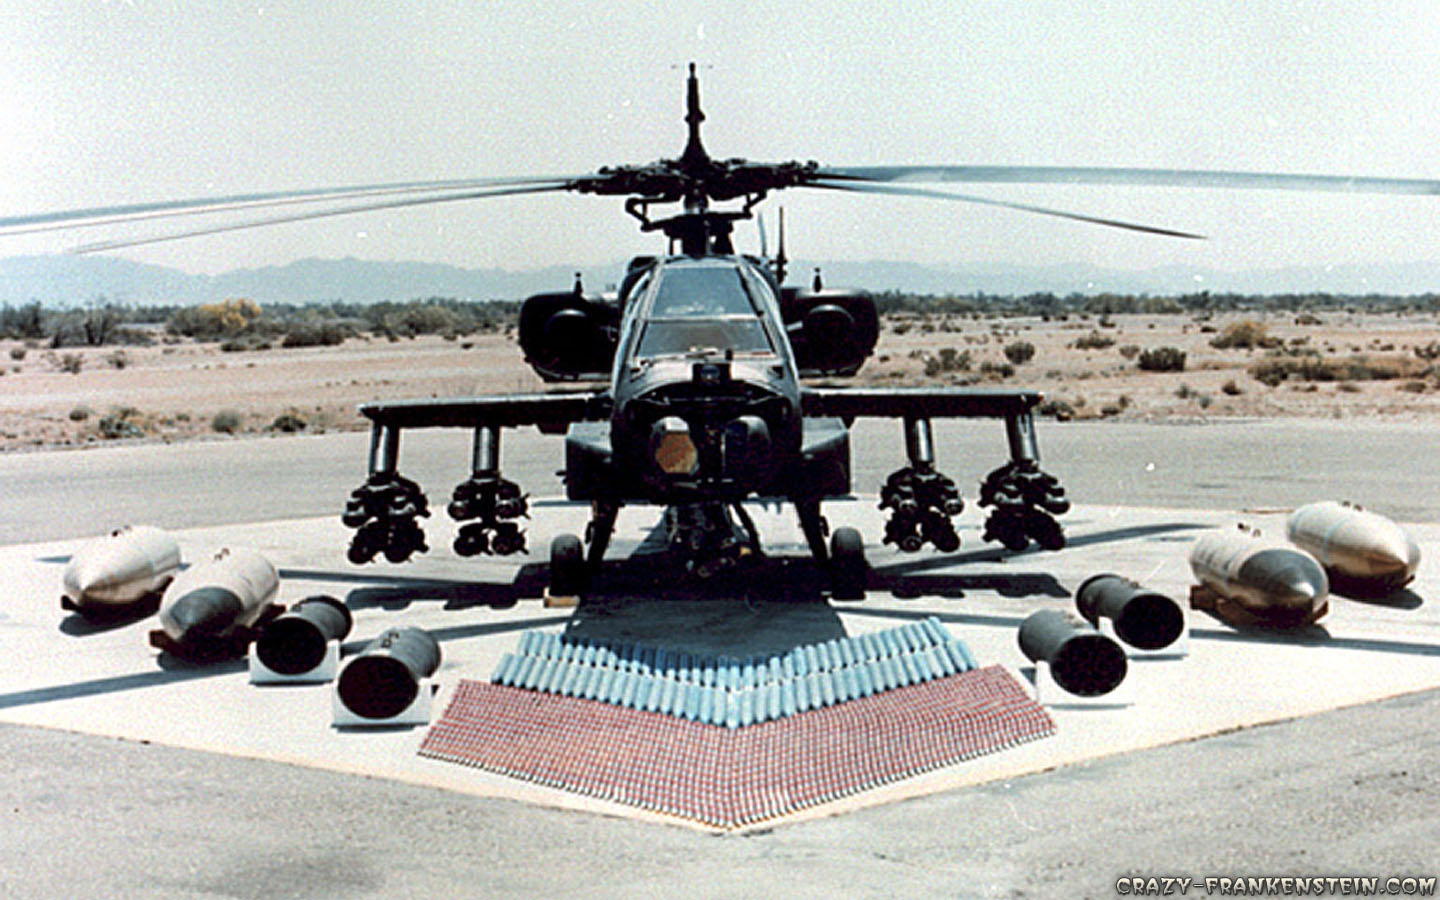  apache helicopter wallpaper apache helicopter attack apache helicopter 1440x900